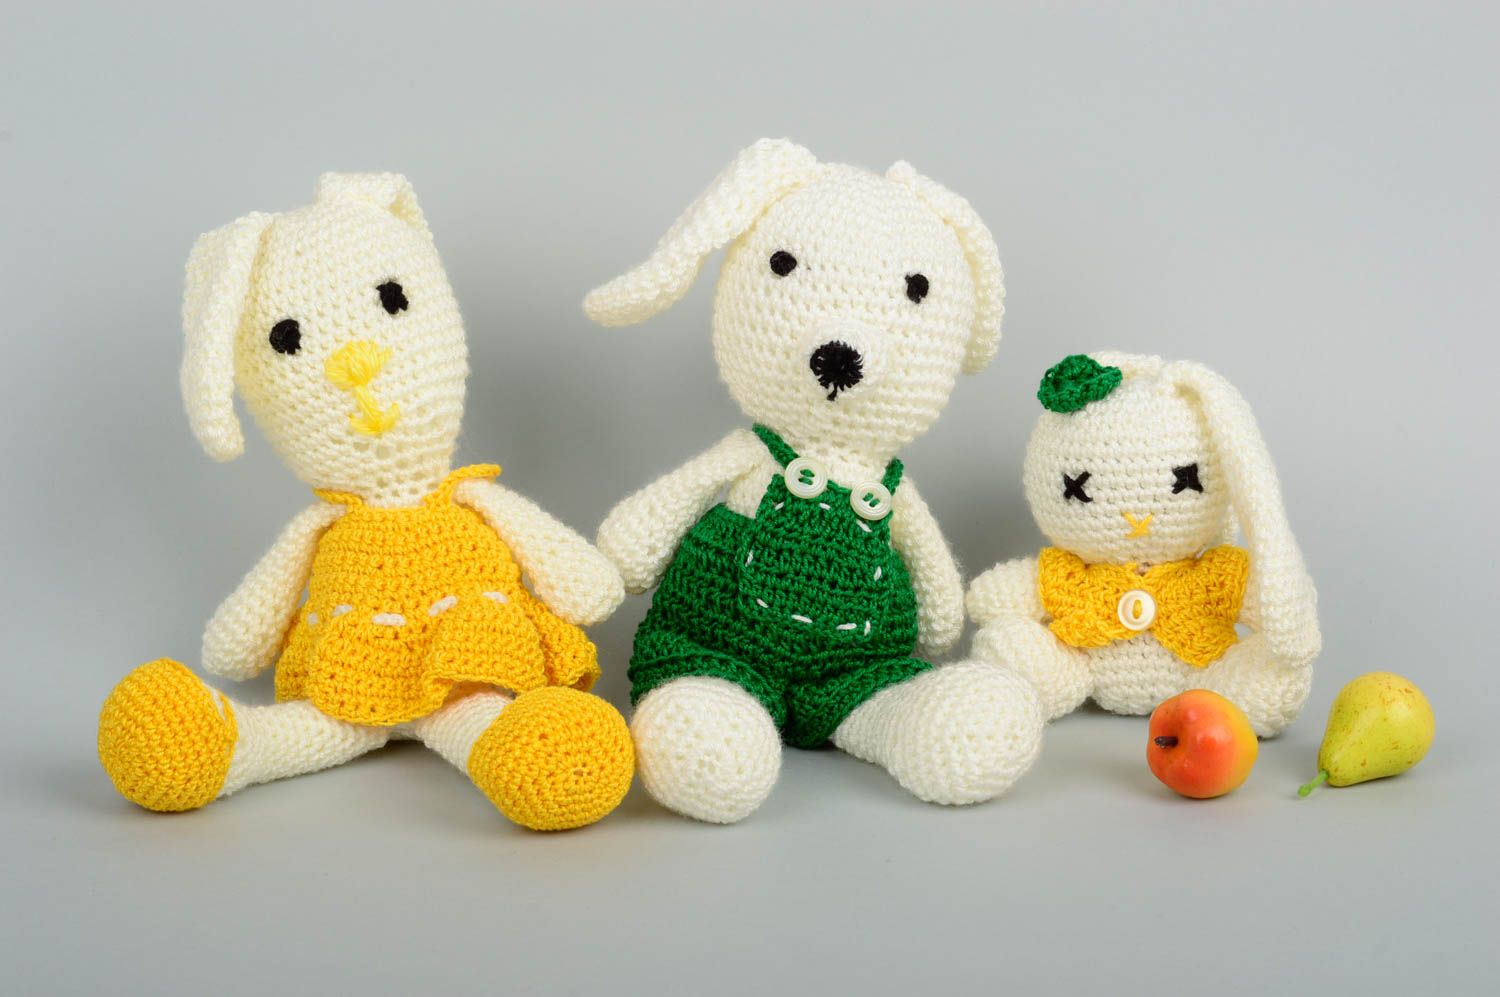 Handmade crochet toy stuffed soft toy childrens toys 3 pieces gifts for kids photo 1